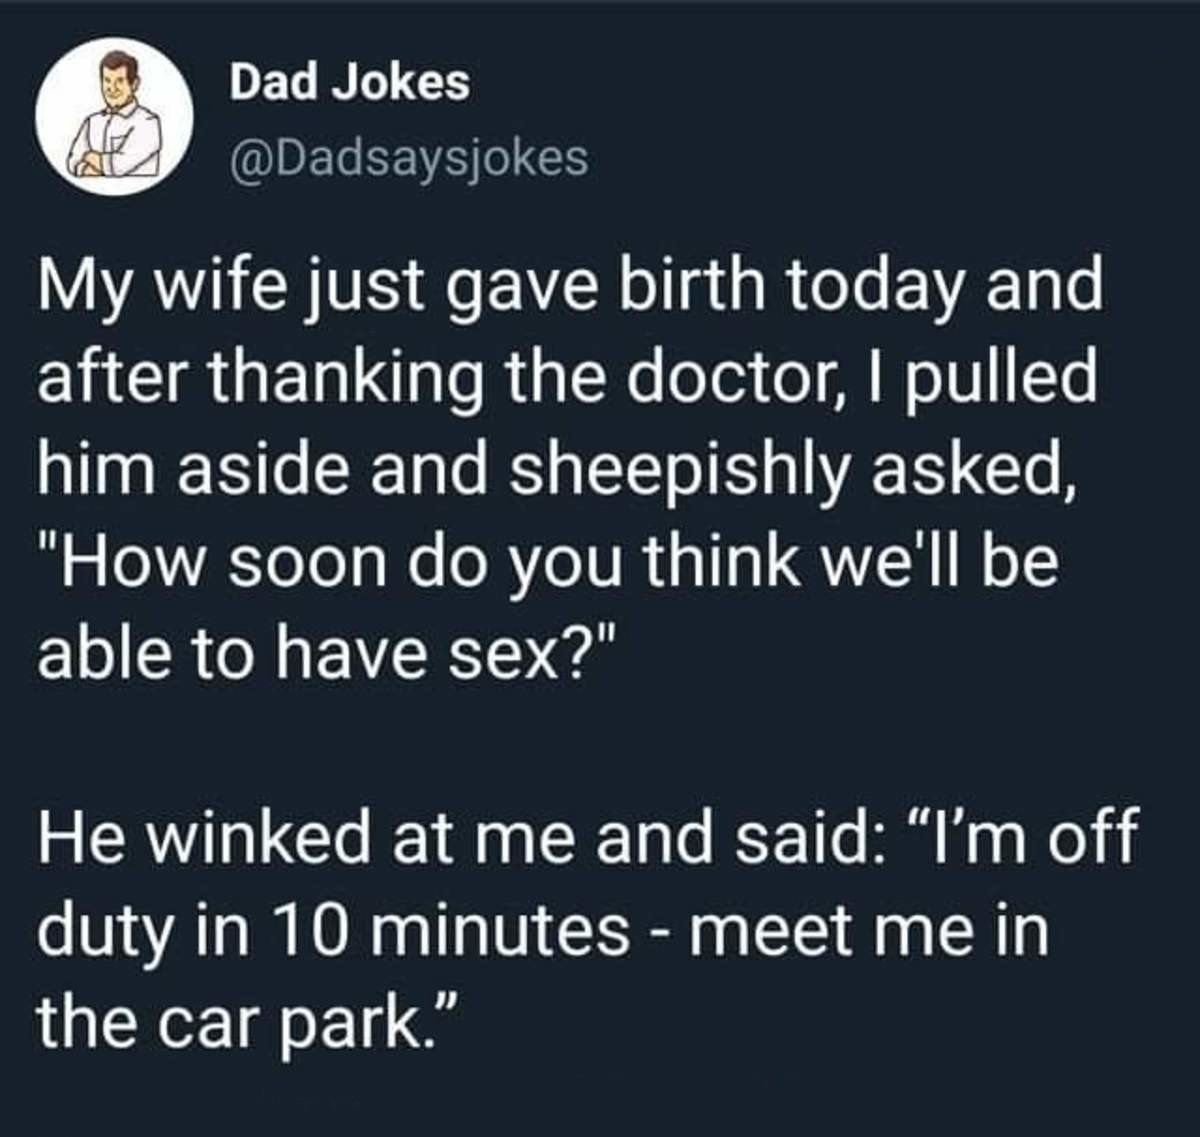 material - Dad Jokes My wife just gave birth today and after thanking the doctor, I pulled him aside and sheepishly asked, "How soon do you think we'll be able to have sex?" He winked at me and said I'm off duty in 10 minutes meet me in the car park.